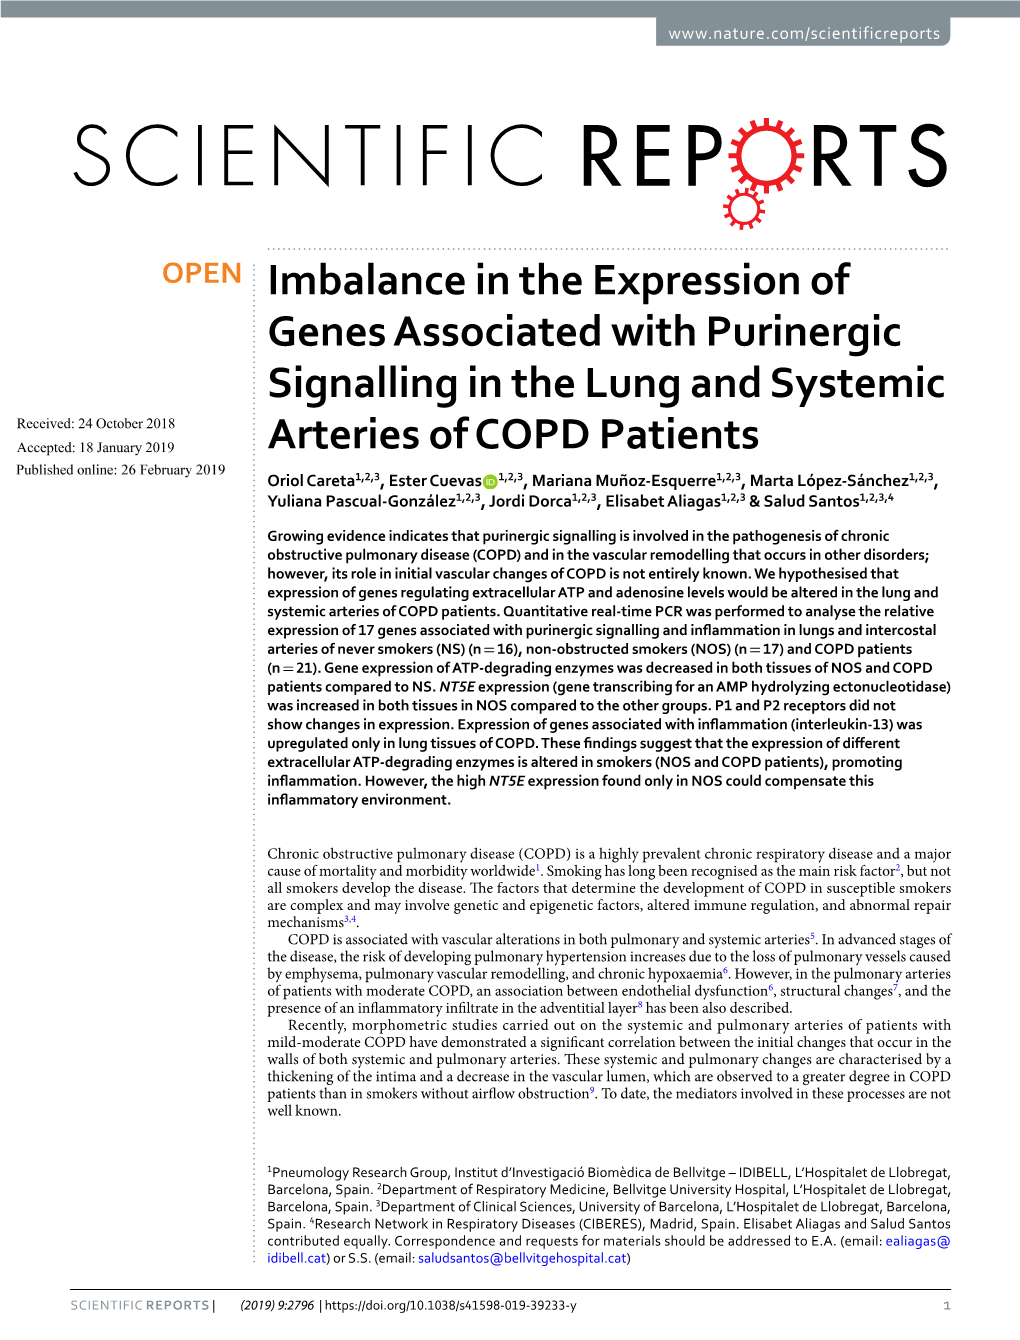 Imbalance in the Expression of Genes Associated with Purinergic